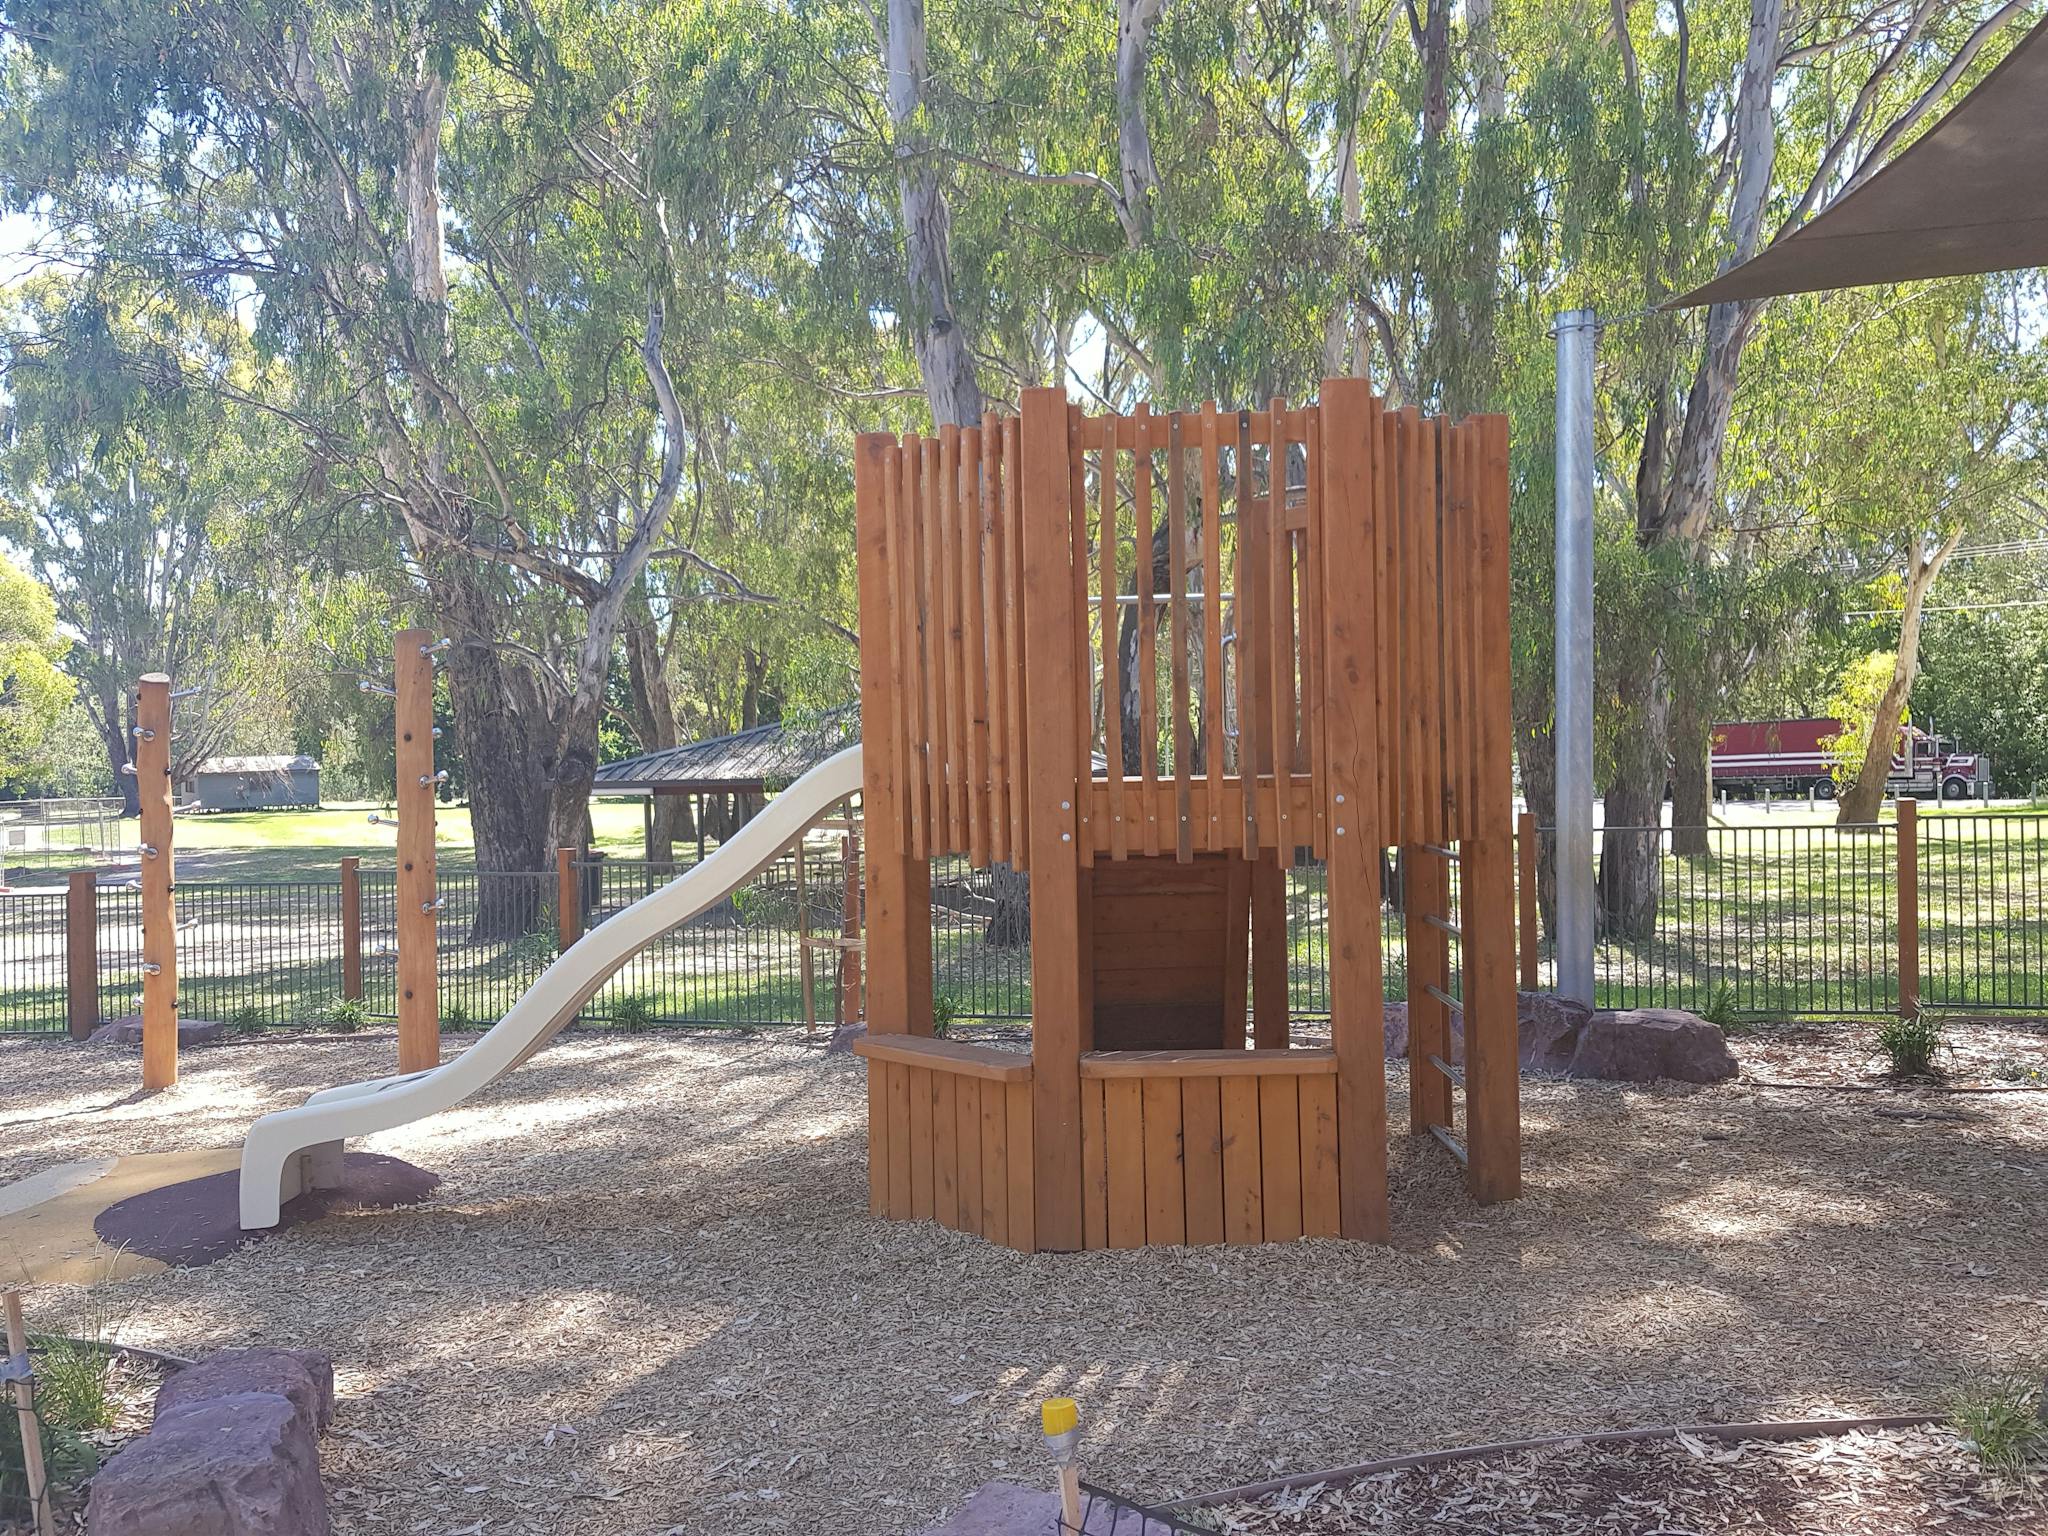 Childrens playground, wooden structure with steps to slide, leafy gum trees, shade sails